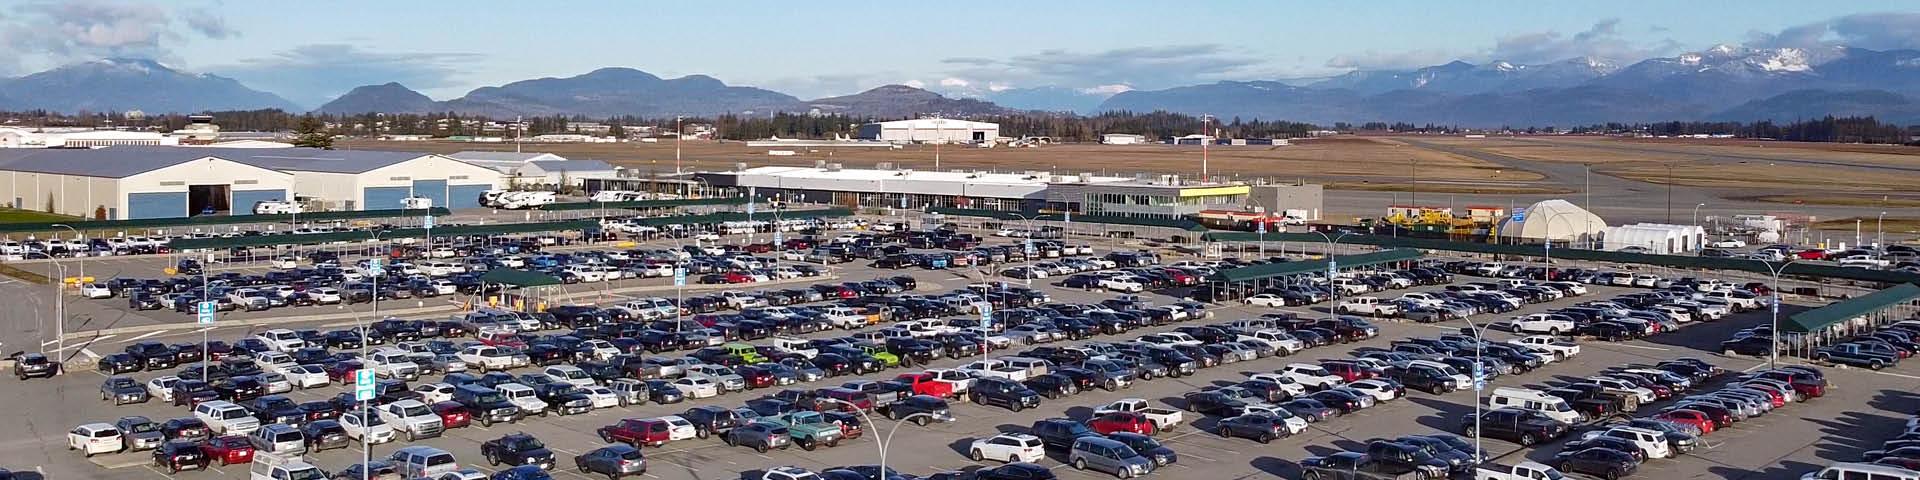 Image of Parking lot at airport